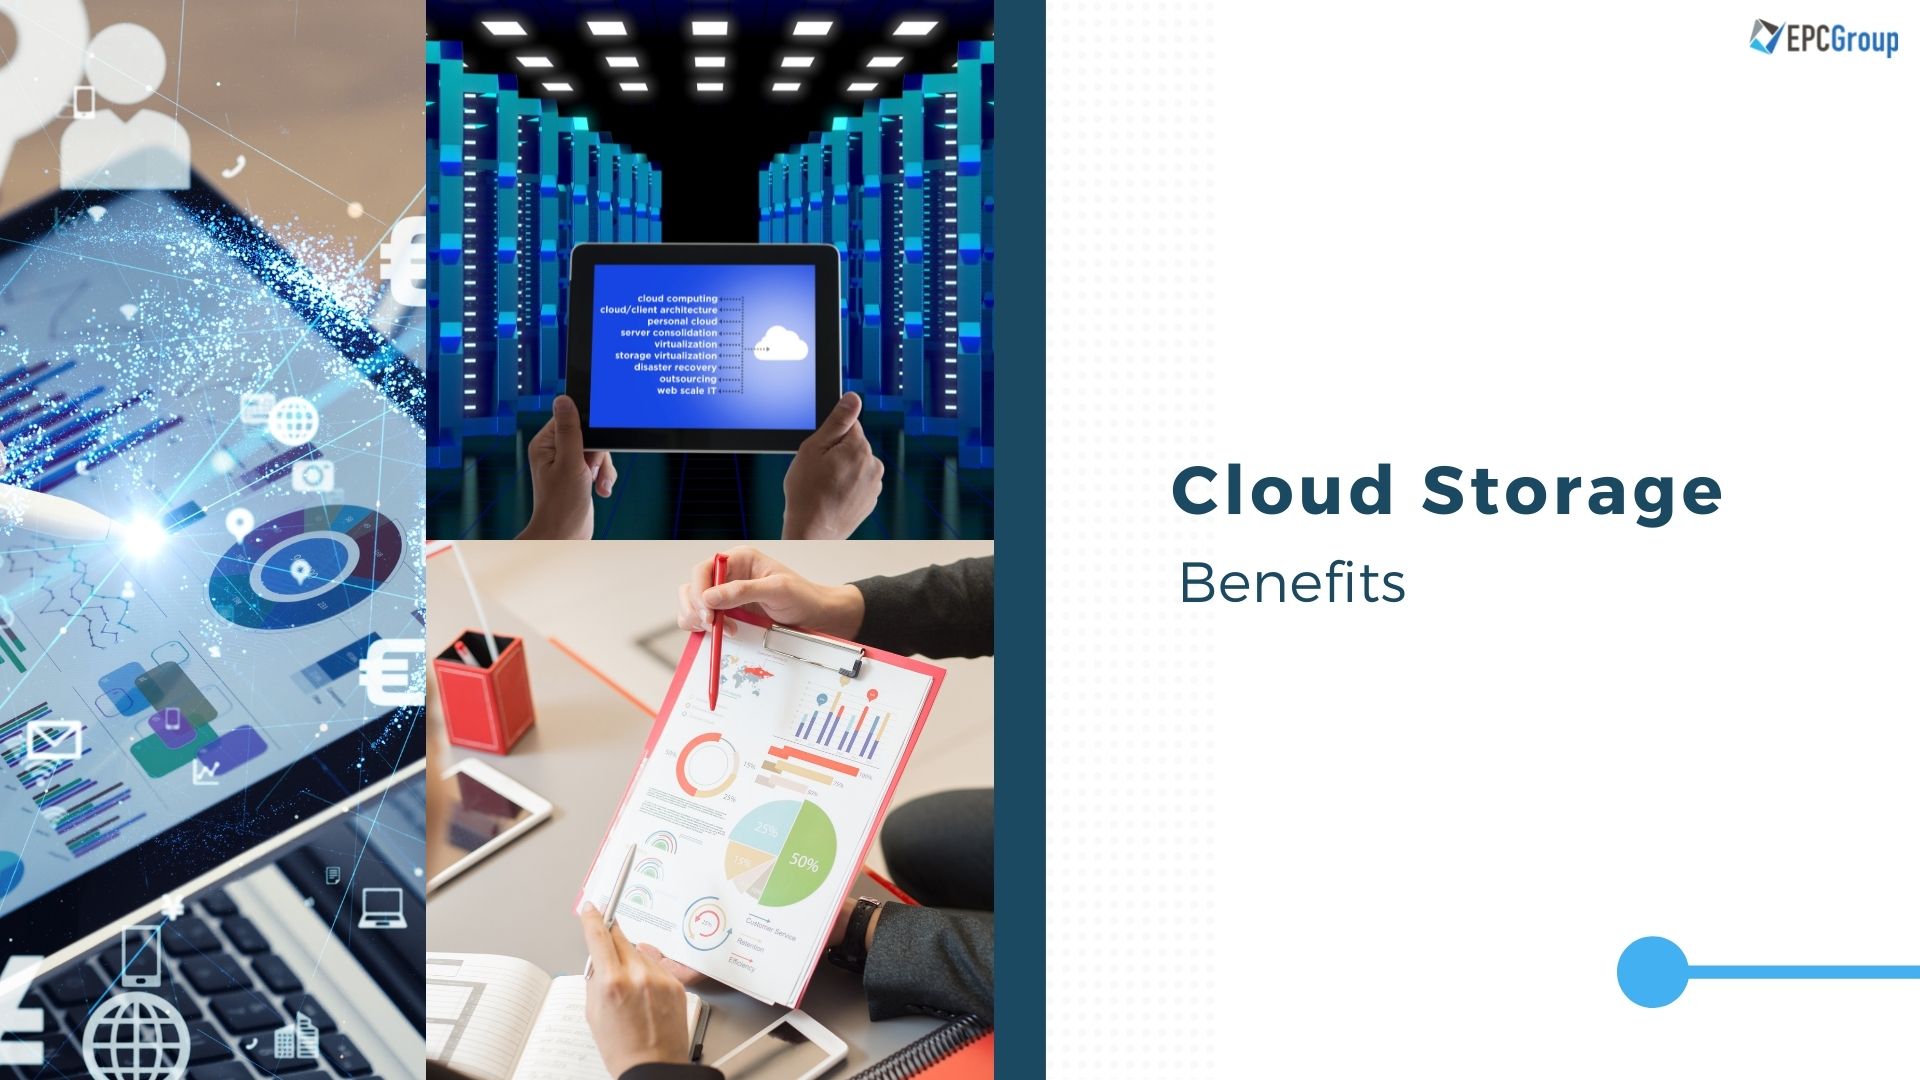 What Are The Benefits Of Cloud Storage For An Organization? - thumb image